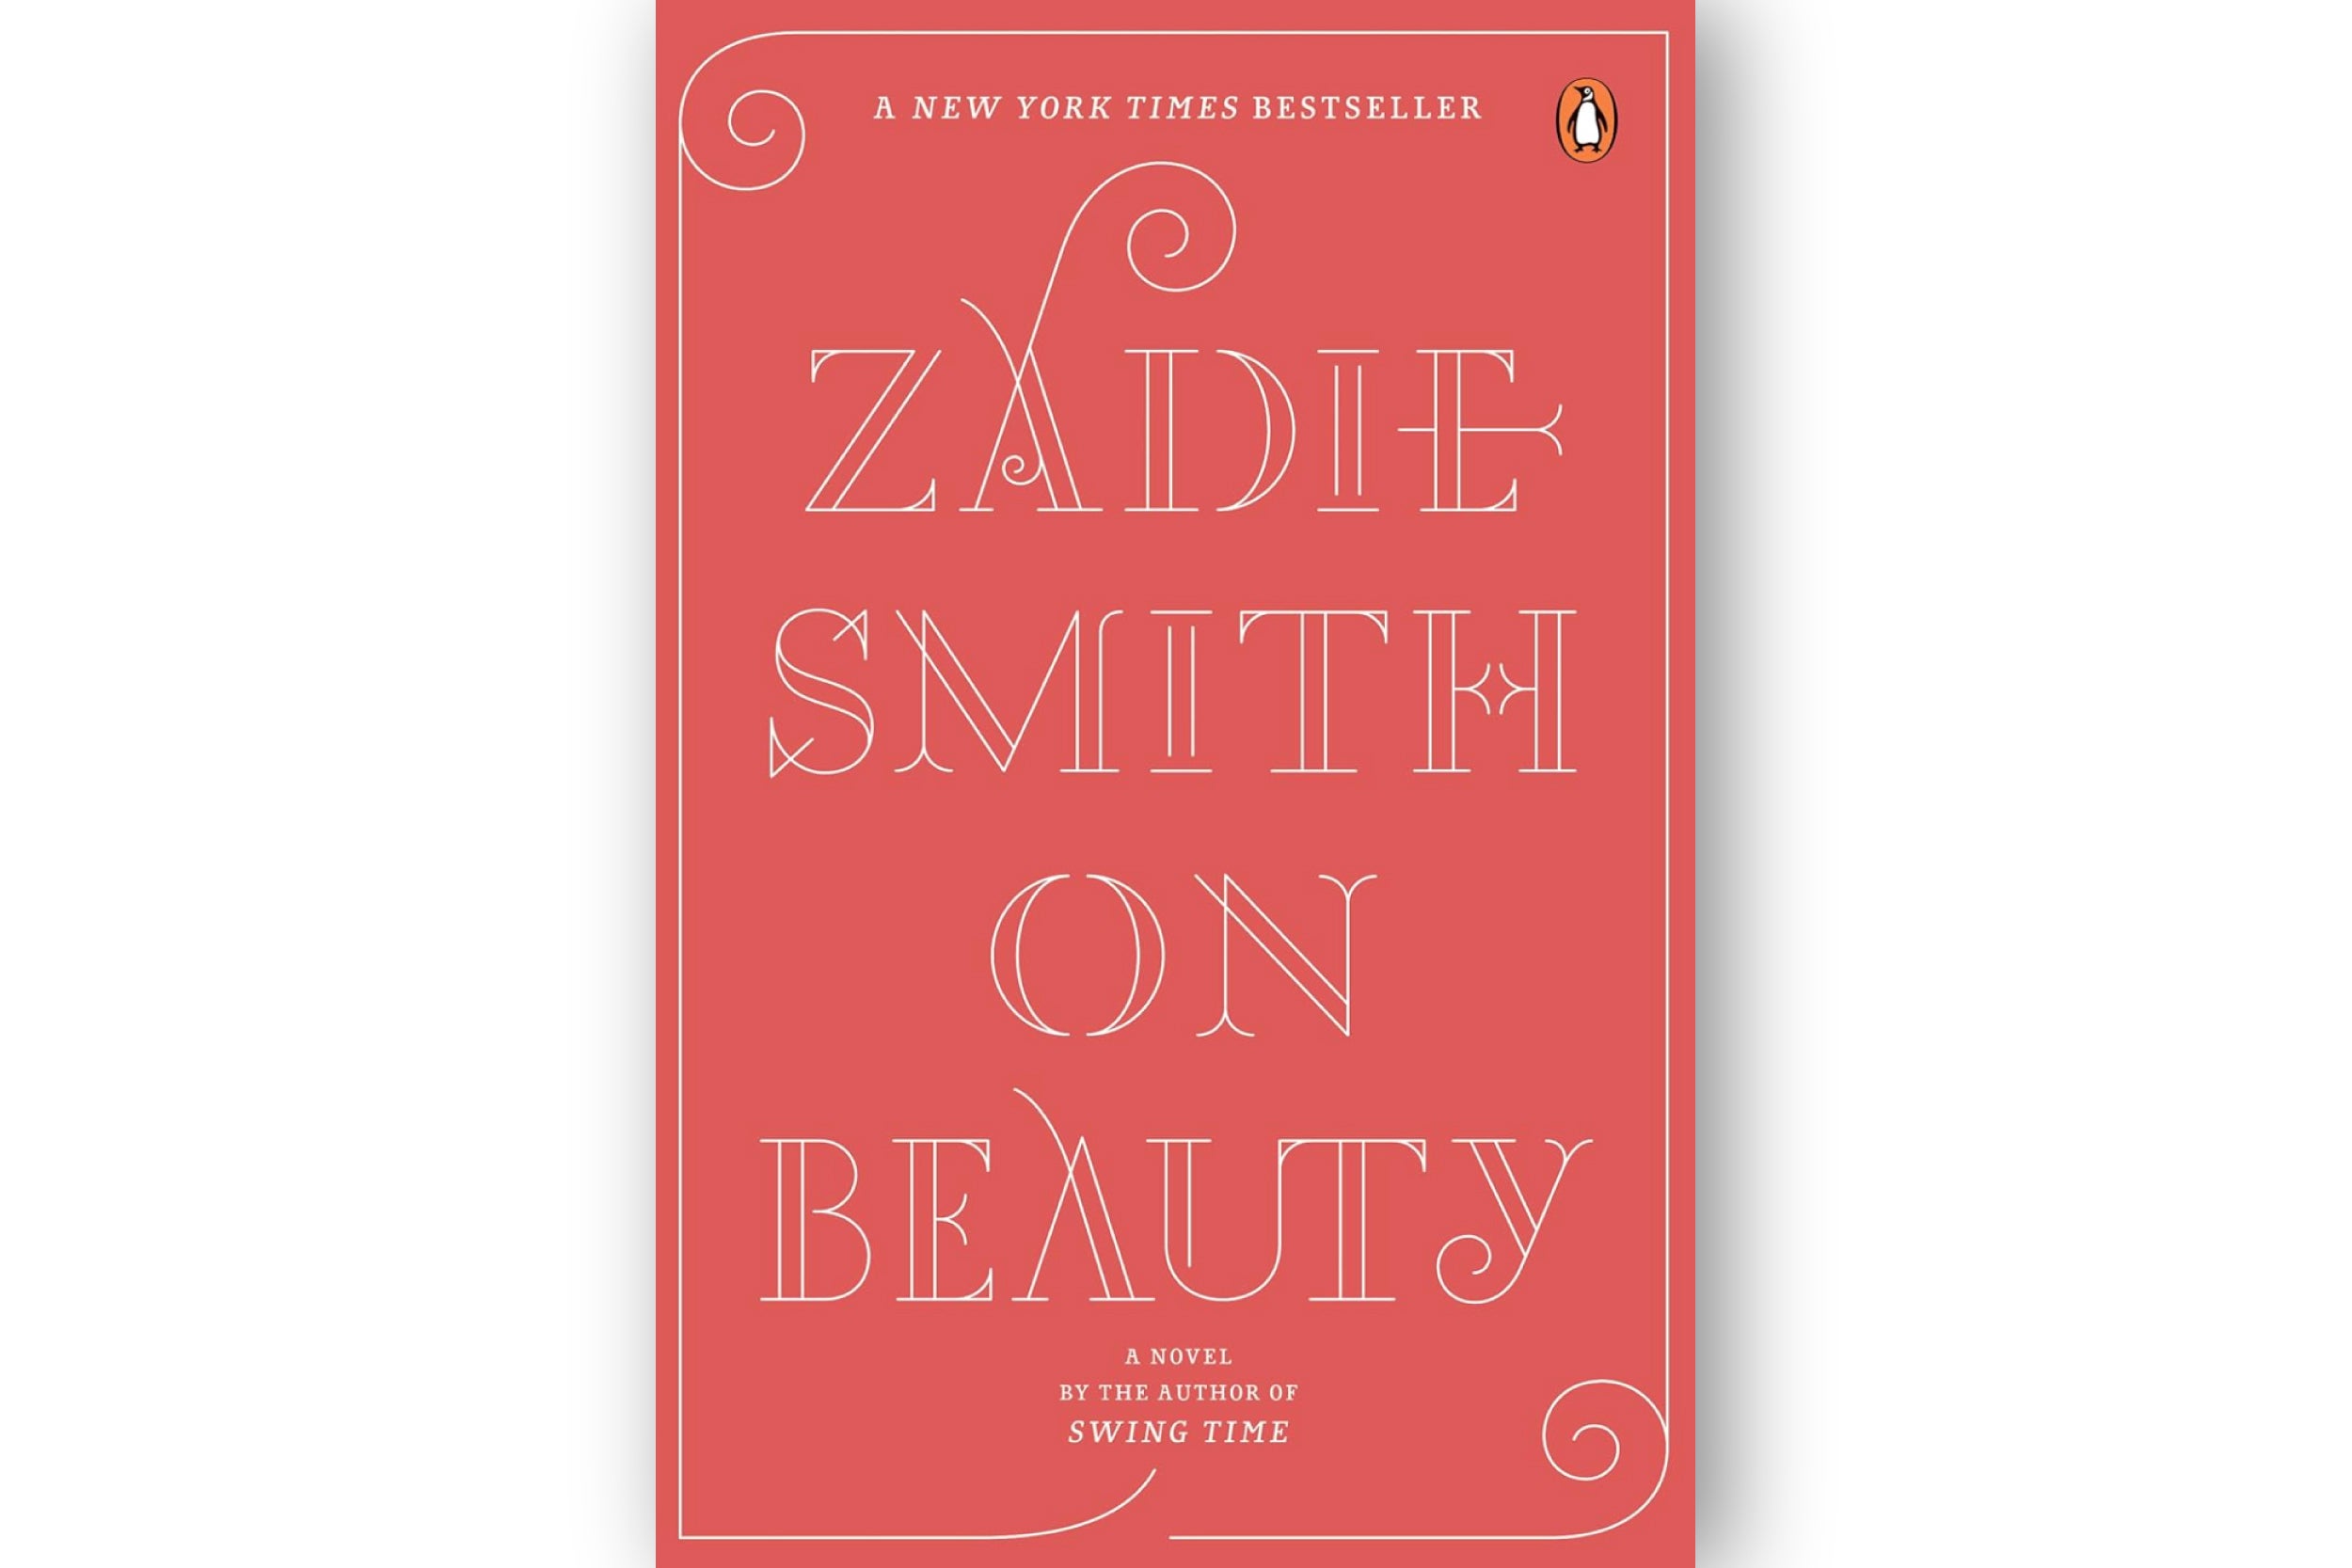 Book cover: "On Beauty" by Zadie Smith.